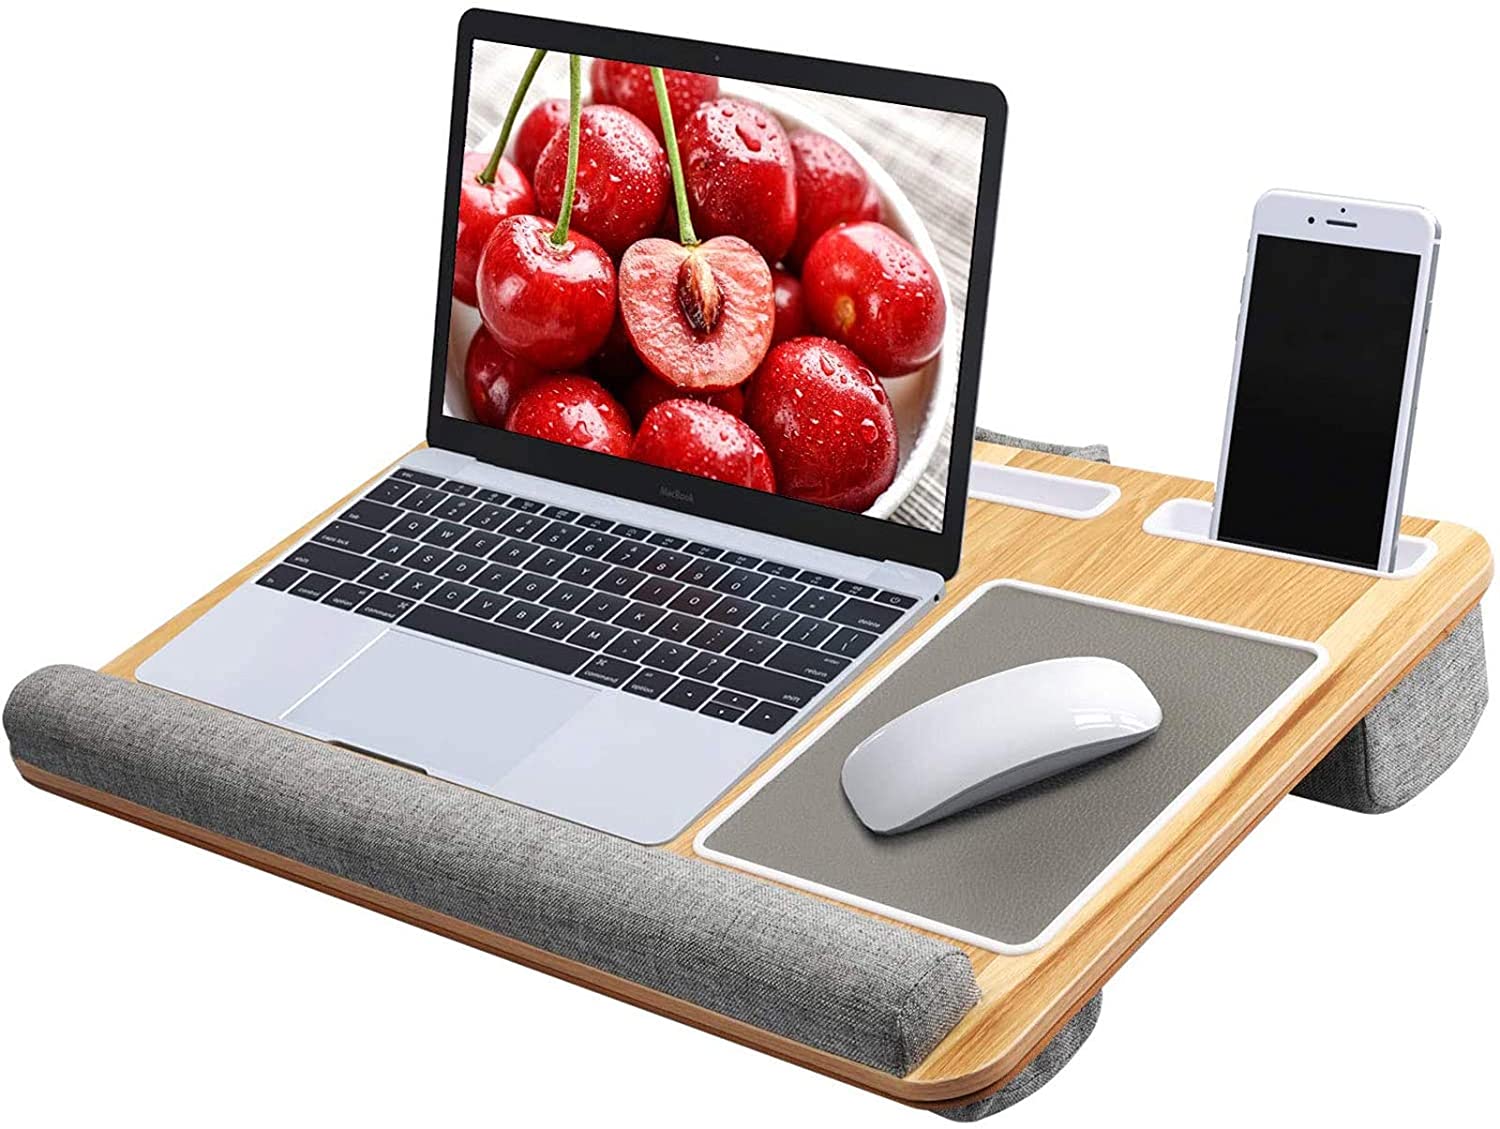 Lap Desk - Fits up to 17 inches Laptop Desk, Built in Mouse Pad & Wrist Pad  for Notebook, MacBook, Tablet, Laptop Stand with Tablet, Pen & Phone Holder  (Wood Grain) 